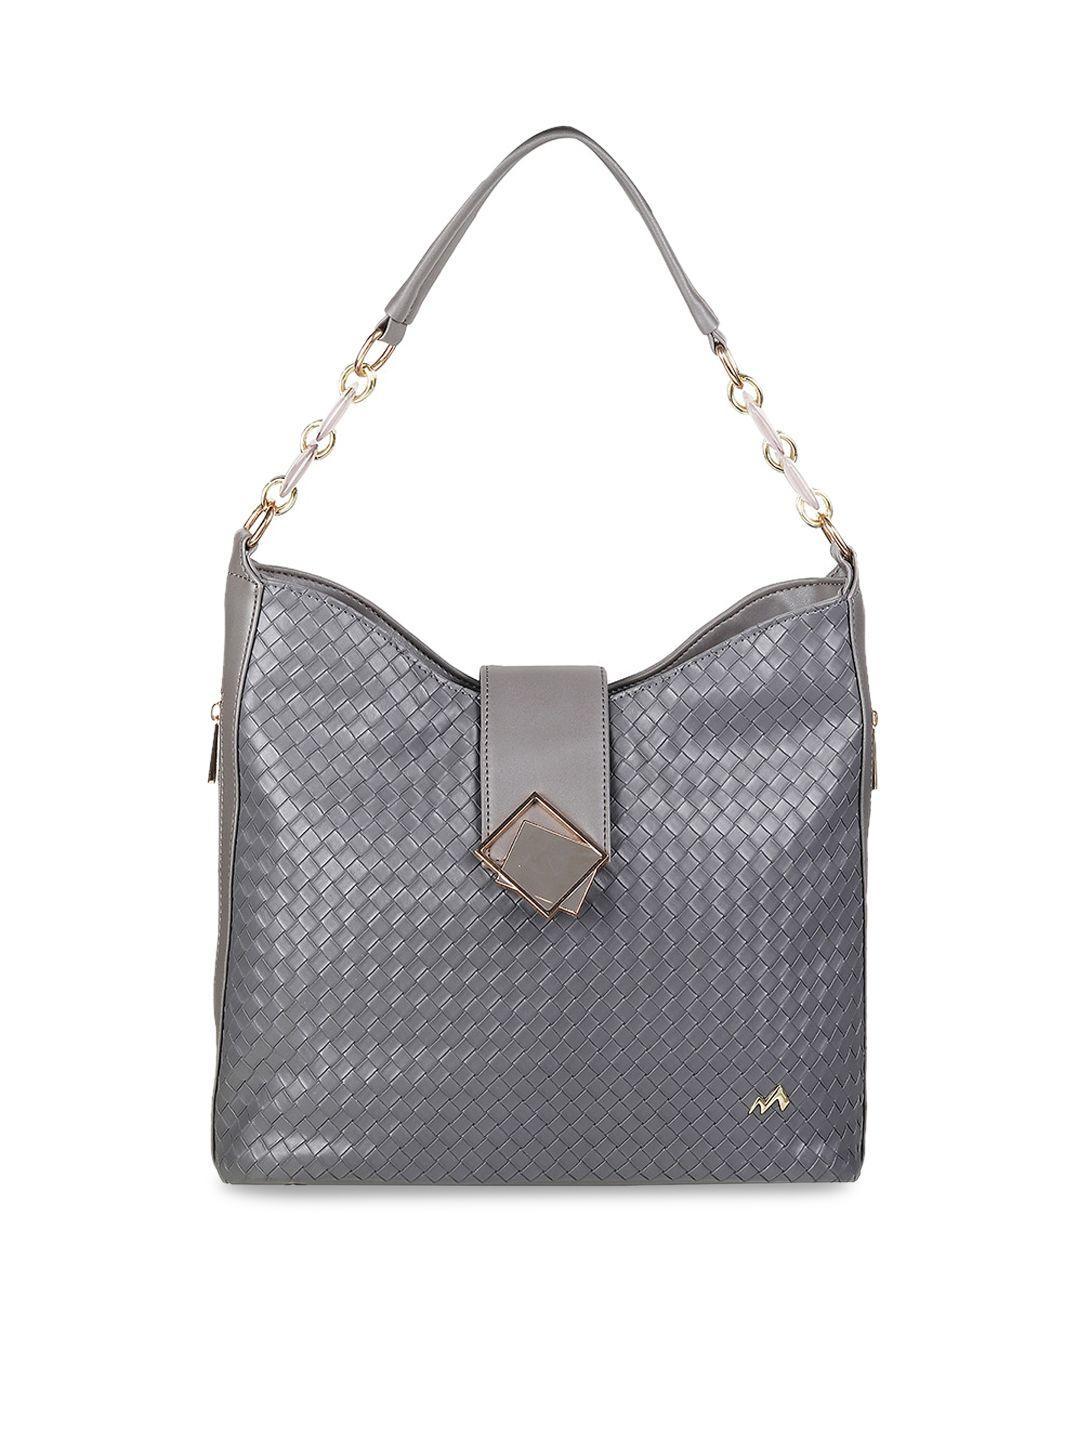 metro grey geometric textured structured hobo bag with cut work